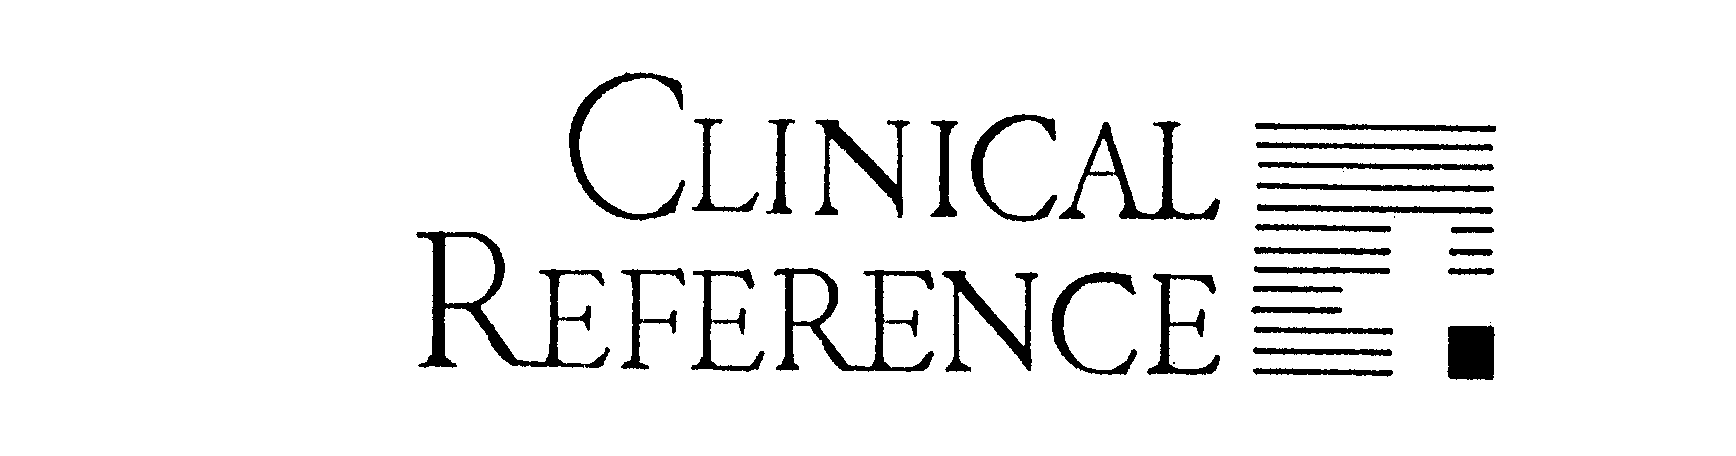  CLINICAL REFERENCE